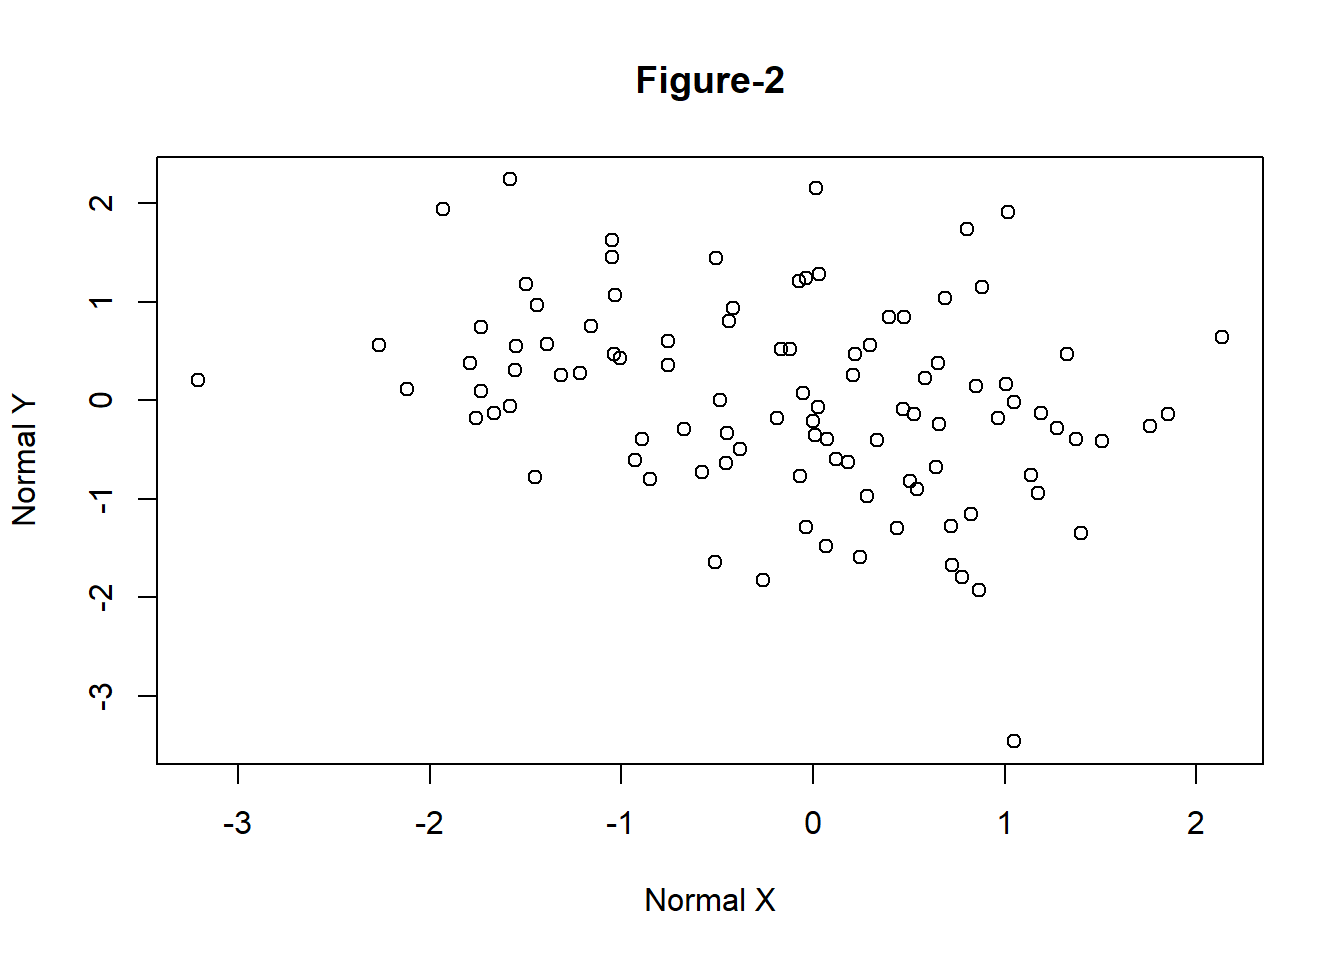 Simple Scatter Plot with Title